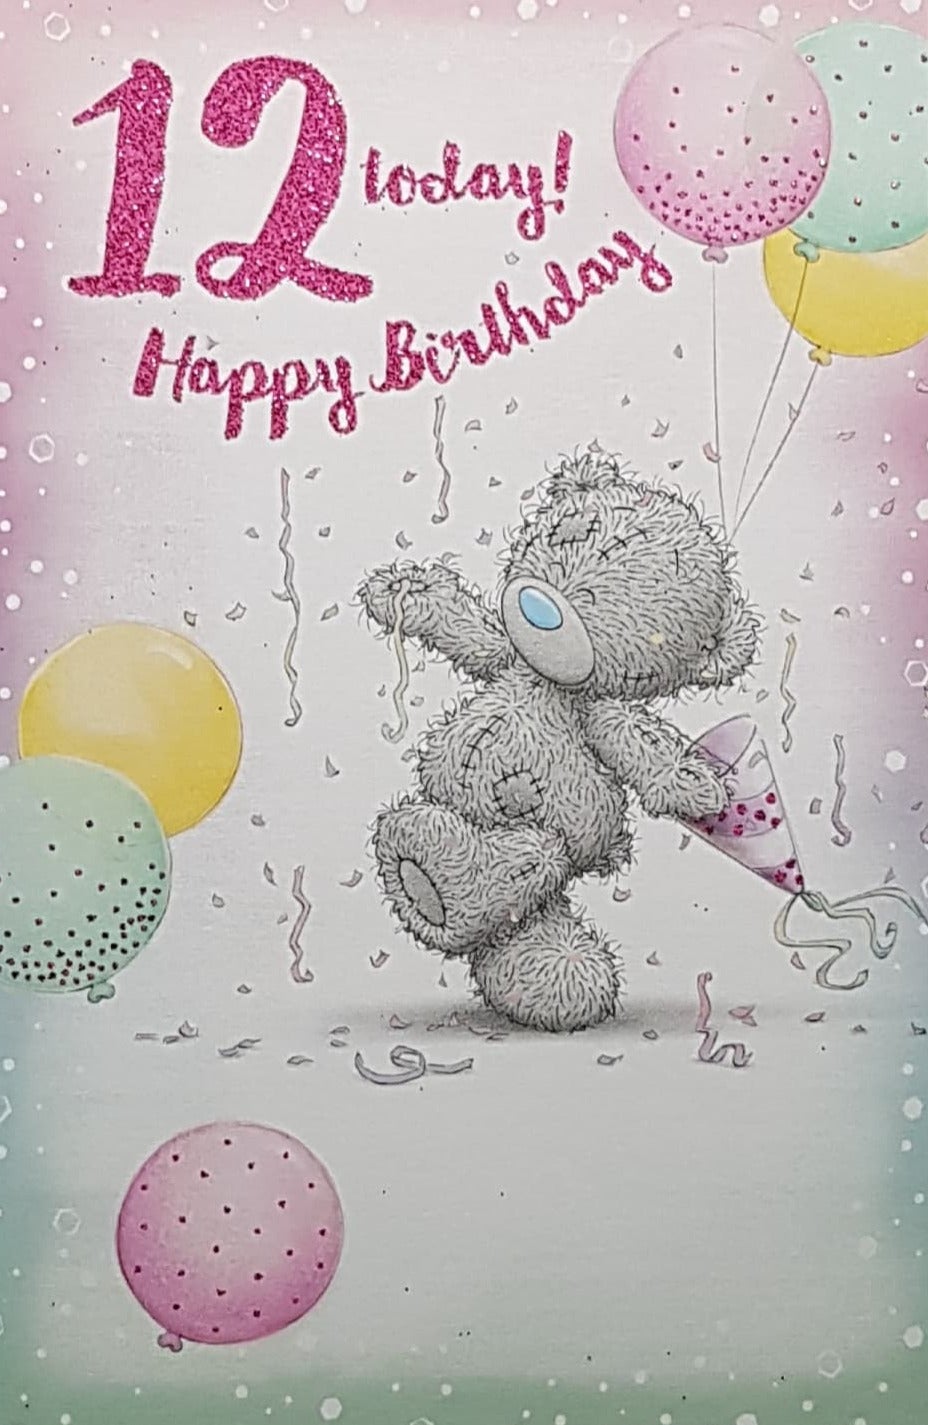 Age 12 Birthday Card - Teddy Holding A Pink Party Hat Strolling With Balloons